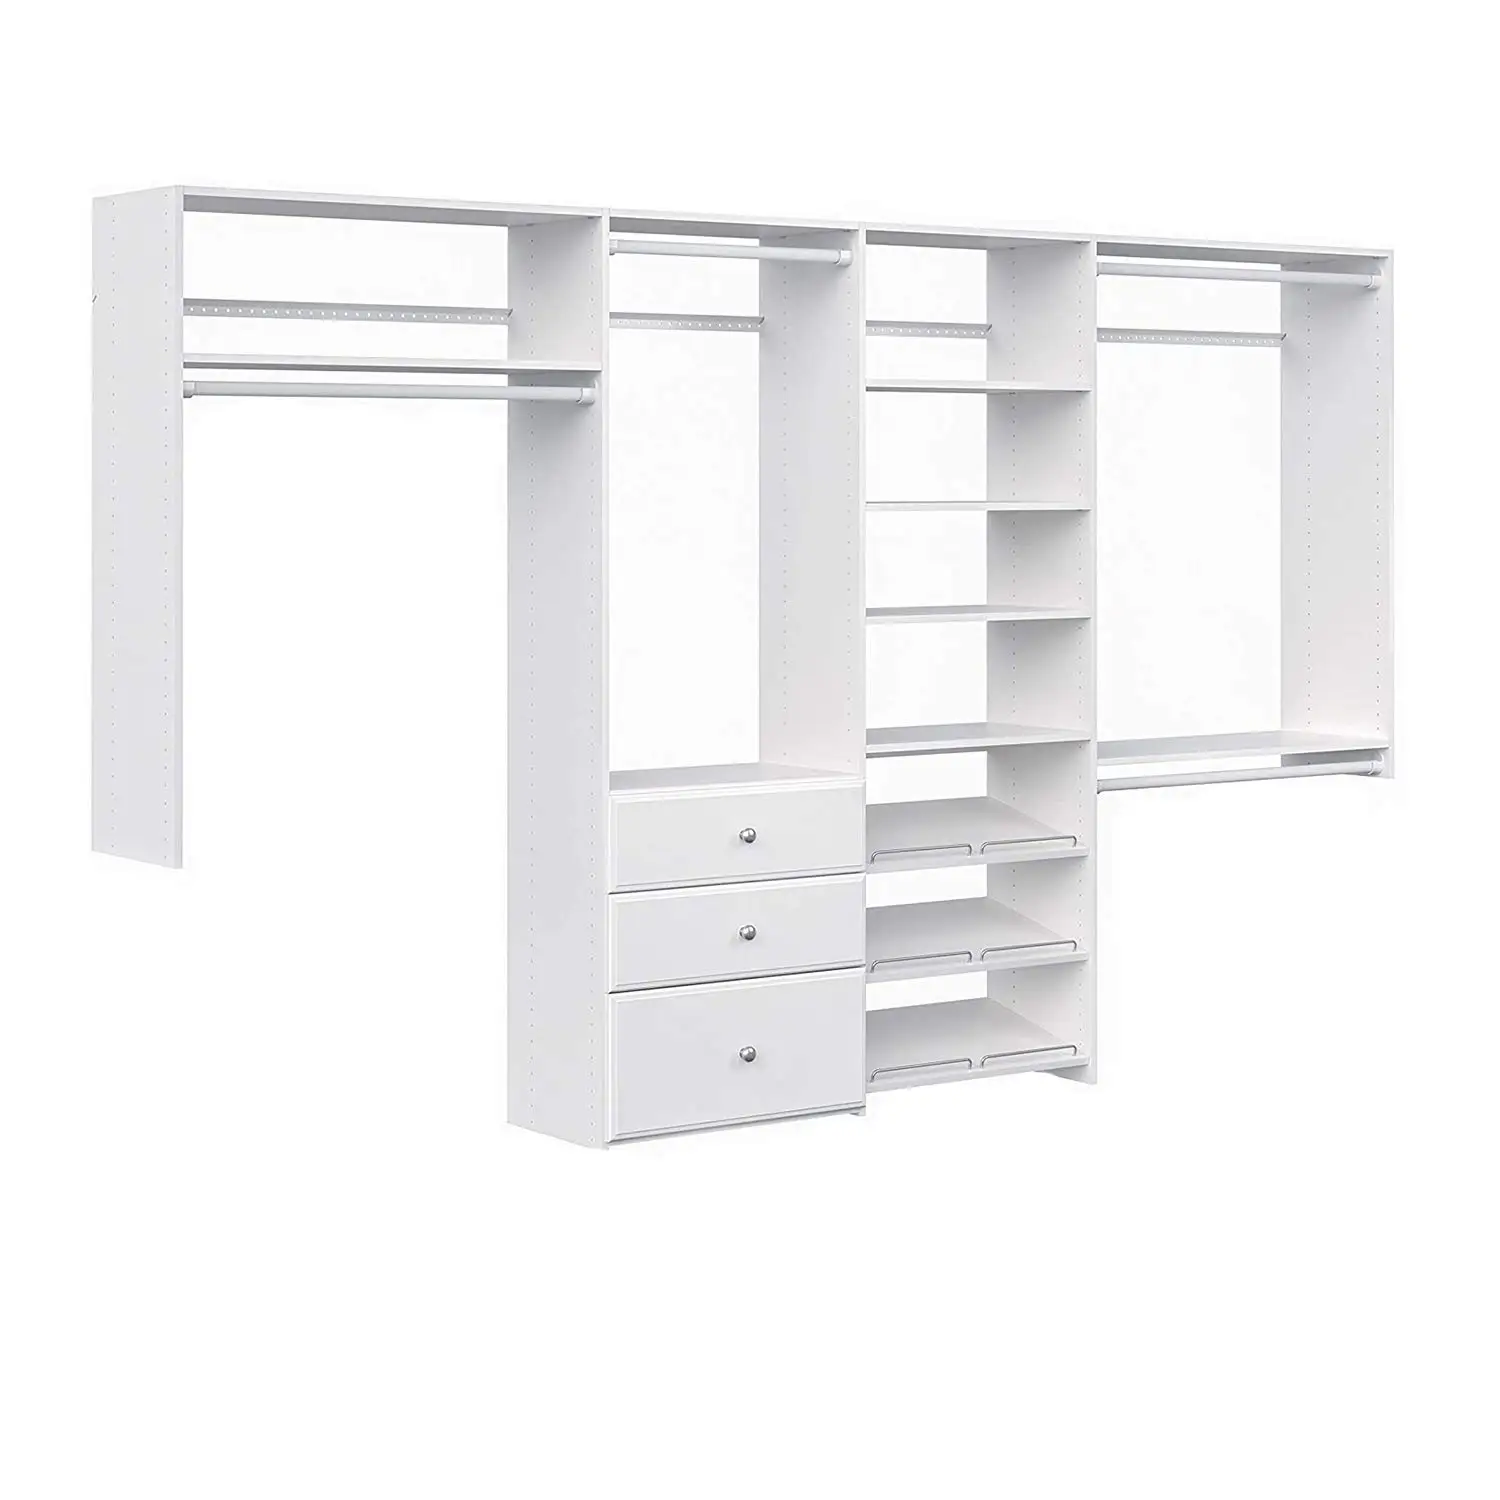 Dual Tower Closet Storage Wall Mounted Wardrobe Organizer Kit System with Shelves and Drawers for Bedroom in White with Hardware